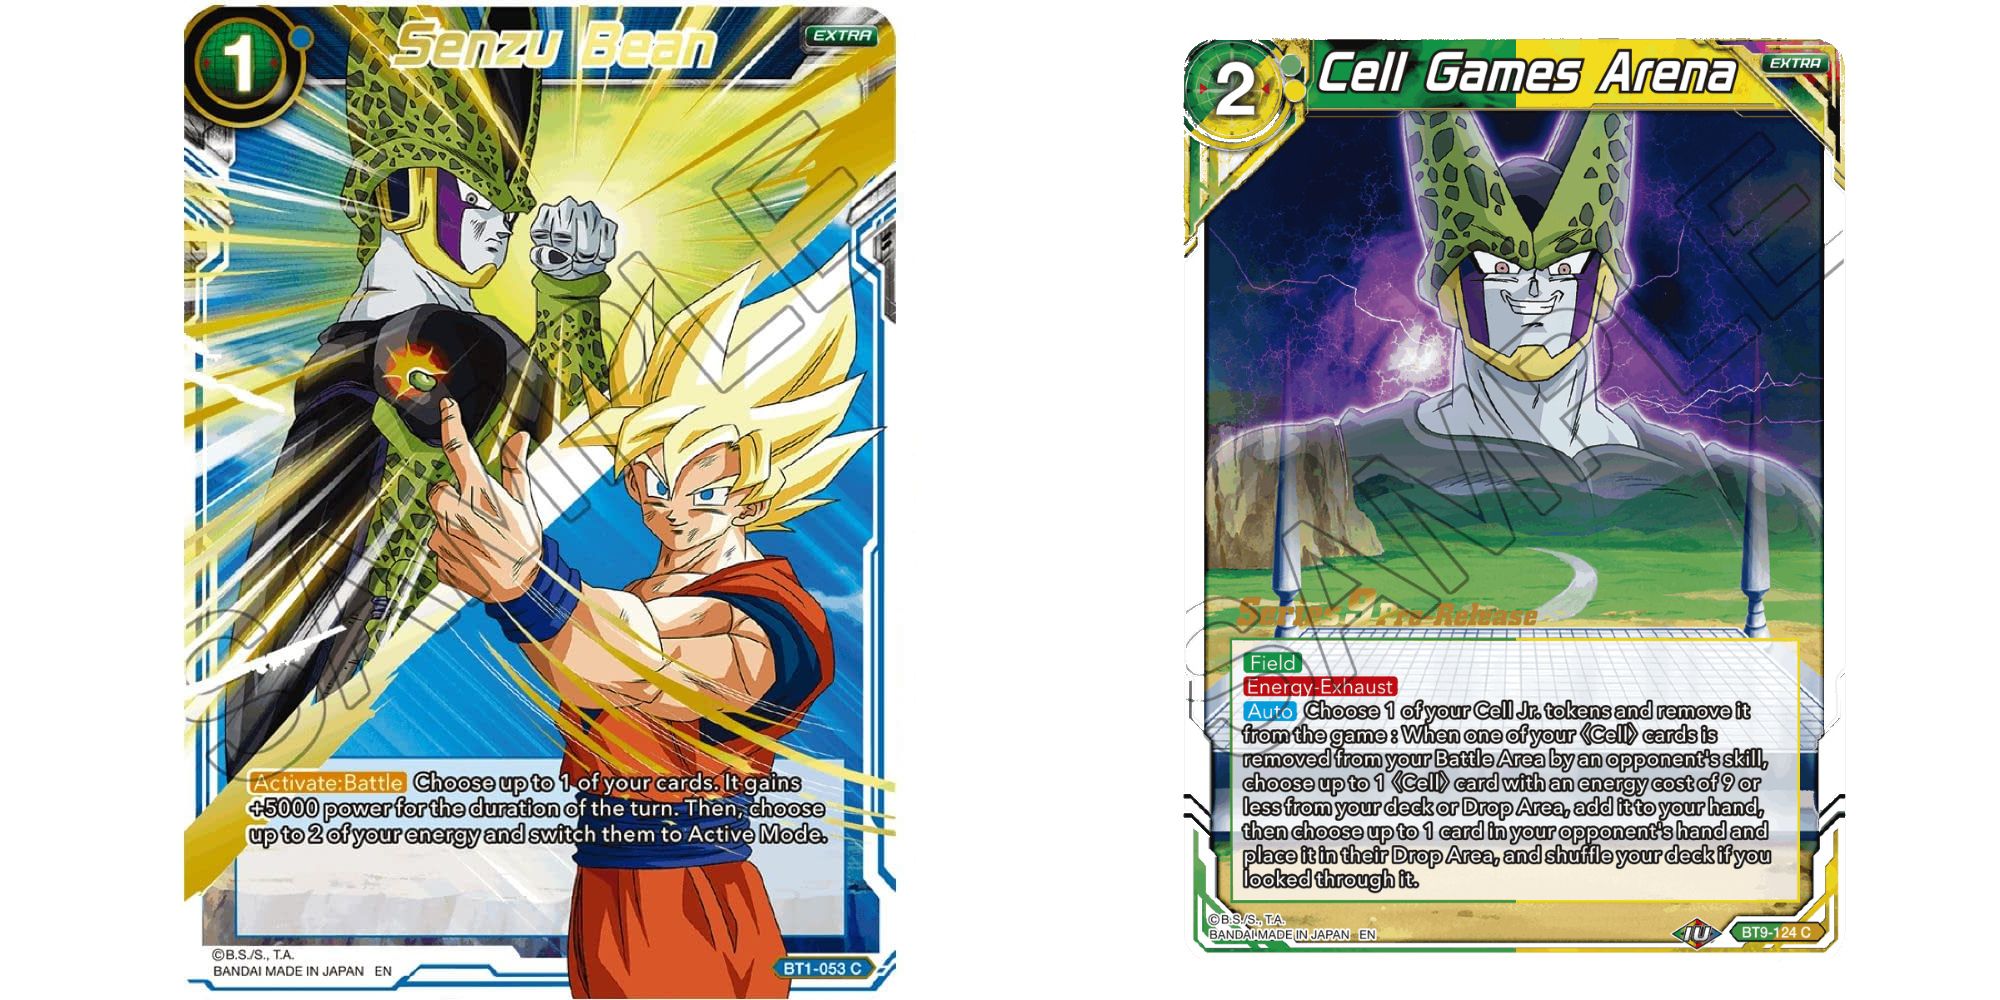 Senzu Bean and Cell Games Arena Extra cards in Dragon Ball Super Card Game.